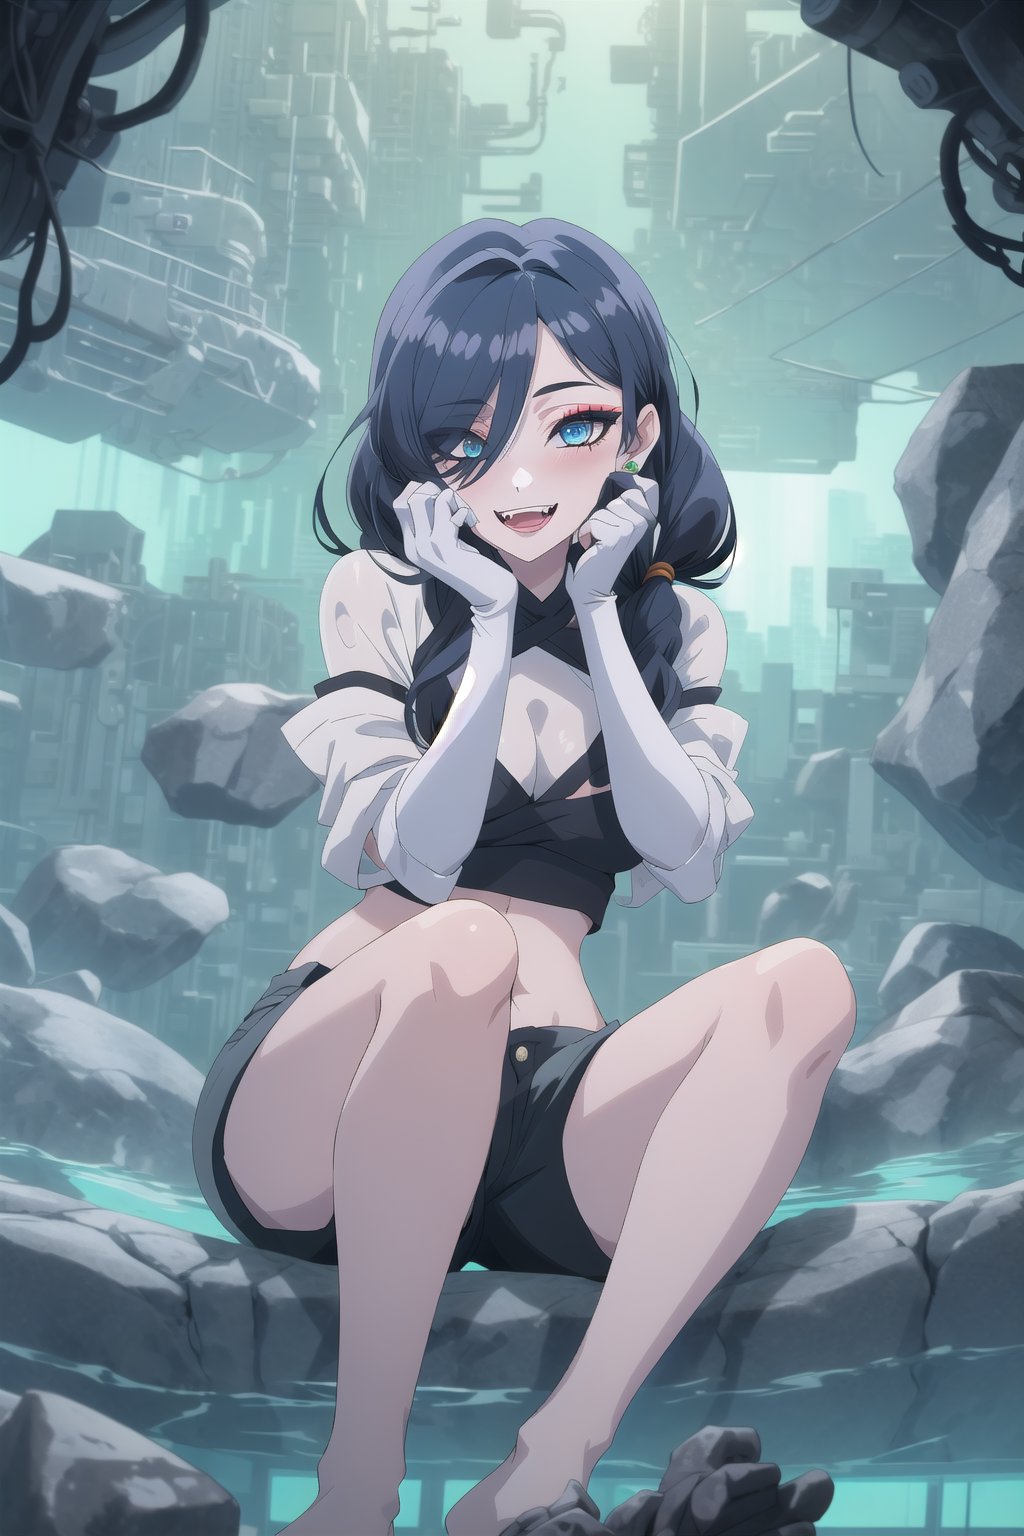 nier anime style illustration, best quality, masterpiece High resolution, good detail, bright colors, HDR, 4K. Dolby vision high. 

Girl with long straight black hair, long twin pigtails (hair covering one eye), blue eyes, blushing, blue earrings 

Stylish Cyberpunk Black Crop Top 

Showing navel, exposed navel 

Elegant cyberpunk black shorts

Barefoot

Inside an underground cave 

Blue illumination in the depth of underground water 

Sitting on a rock 

Black Stylish Fingerless Cyberpunk Gloves

Blue natural lighting

Flirty smile (yandere smile). Happy, excited. Open mouth 

Showing fangs, exposed fangs

jirai kei makeup

jirai kei makeup

Black hair

Inside an underground cave

Showing fangs, exposed fangs


(A hand on one's own face)
